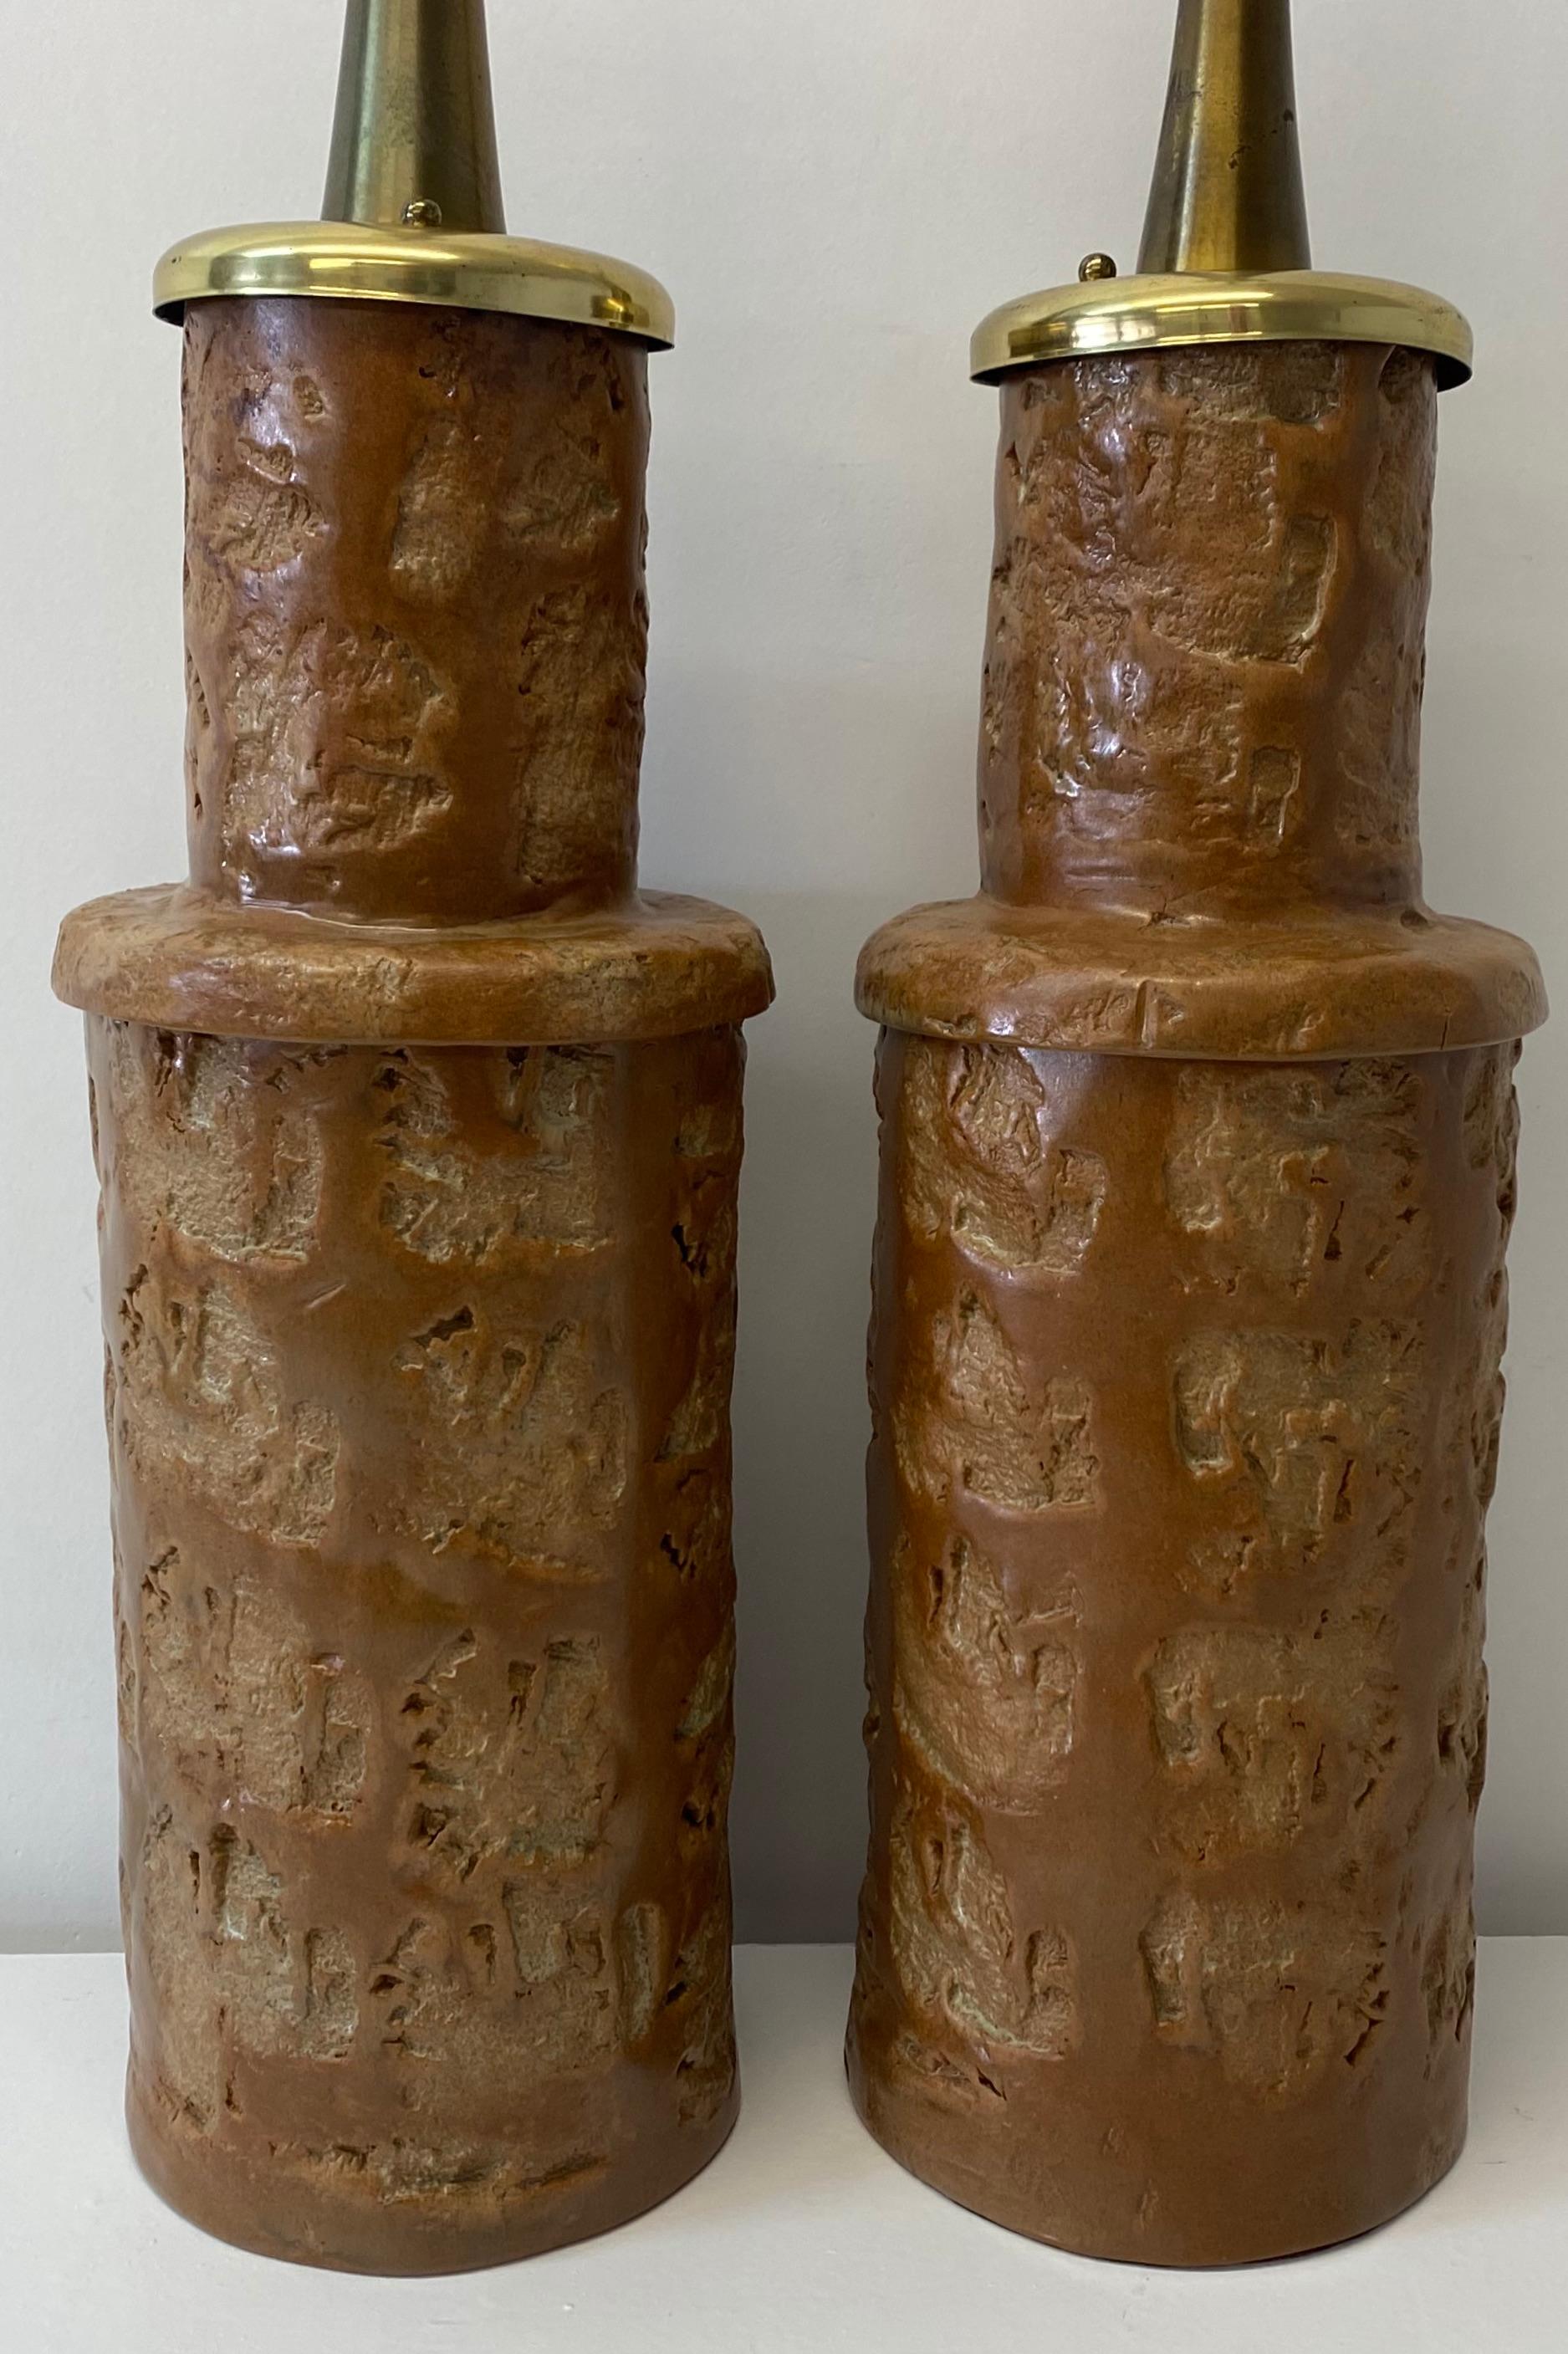 Pair of mid 20th century glazed terracotta table lamps, C.1950

Outstanding hand crafted stoneware / terracotta table lamps

These large table lamps are wired and ready to illuminate

No shades / No harps

6.75